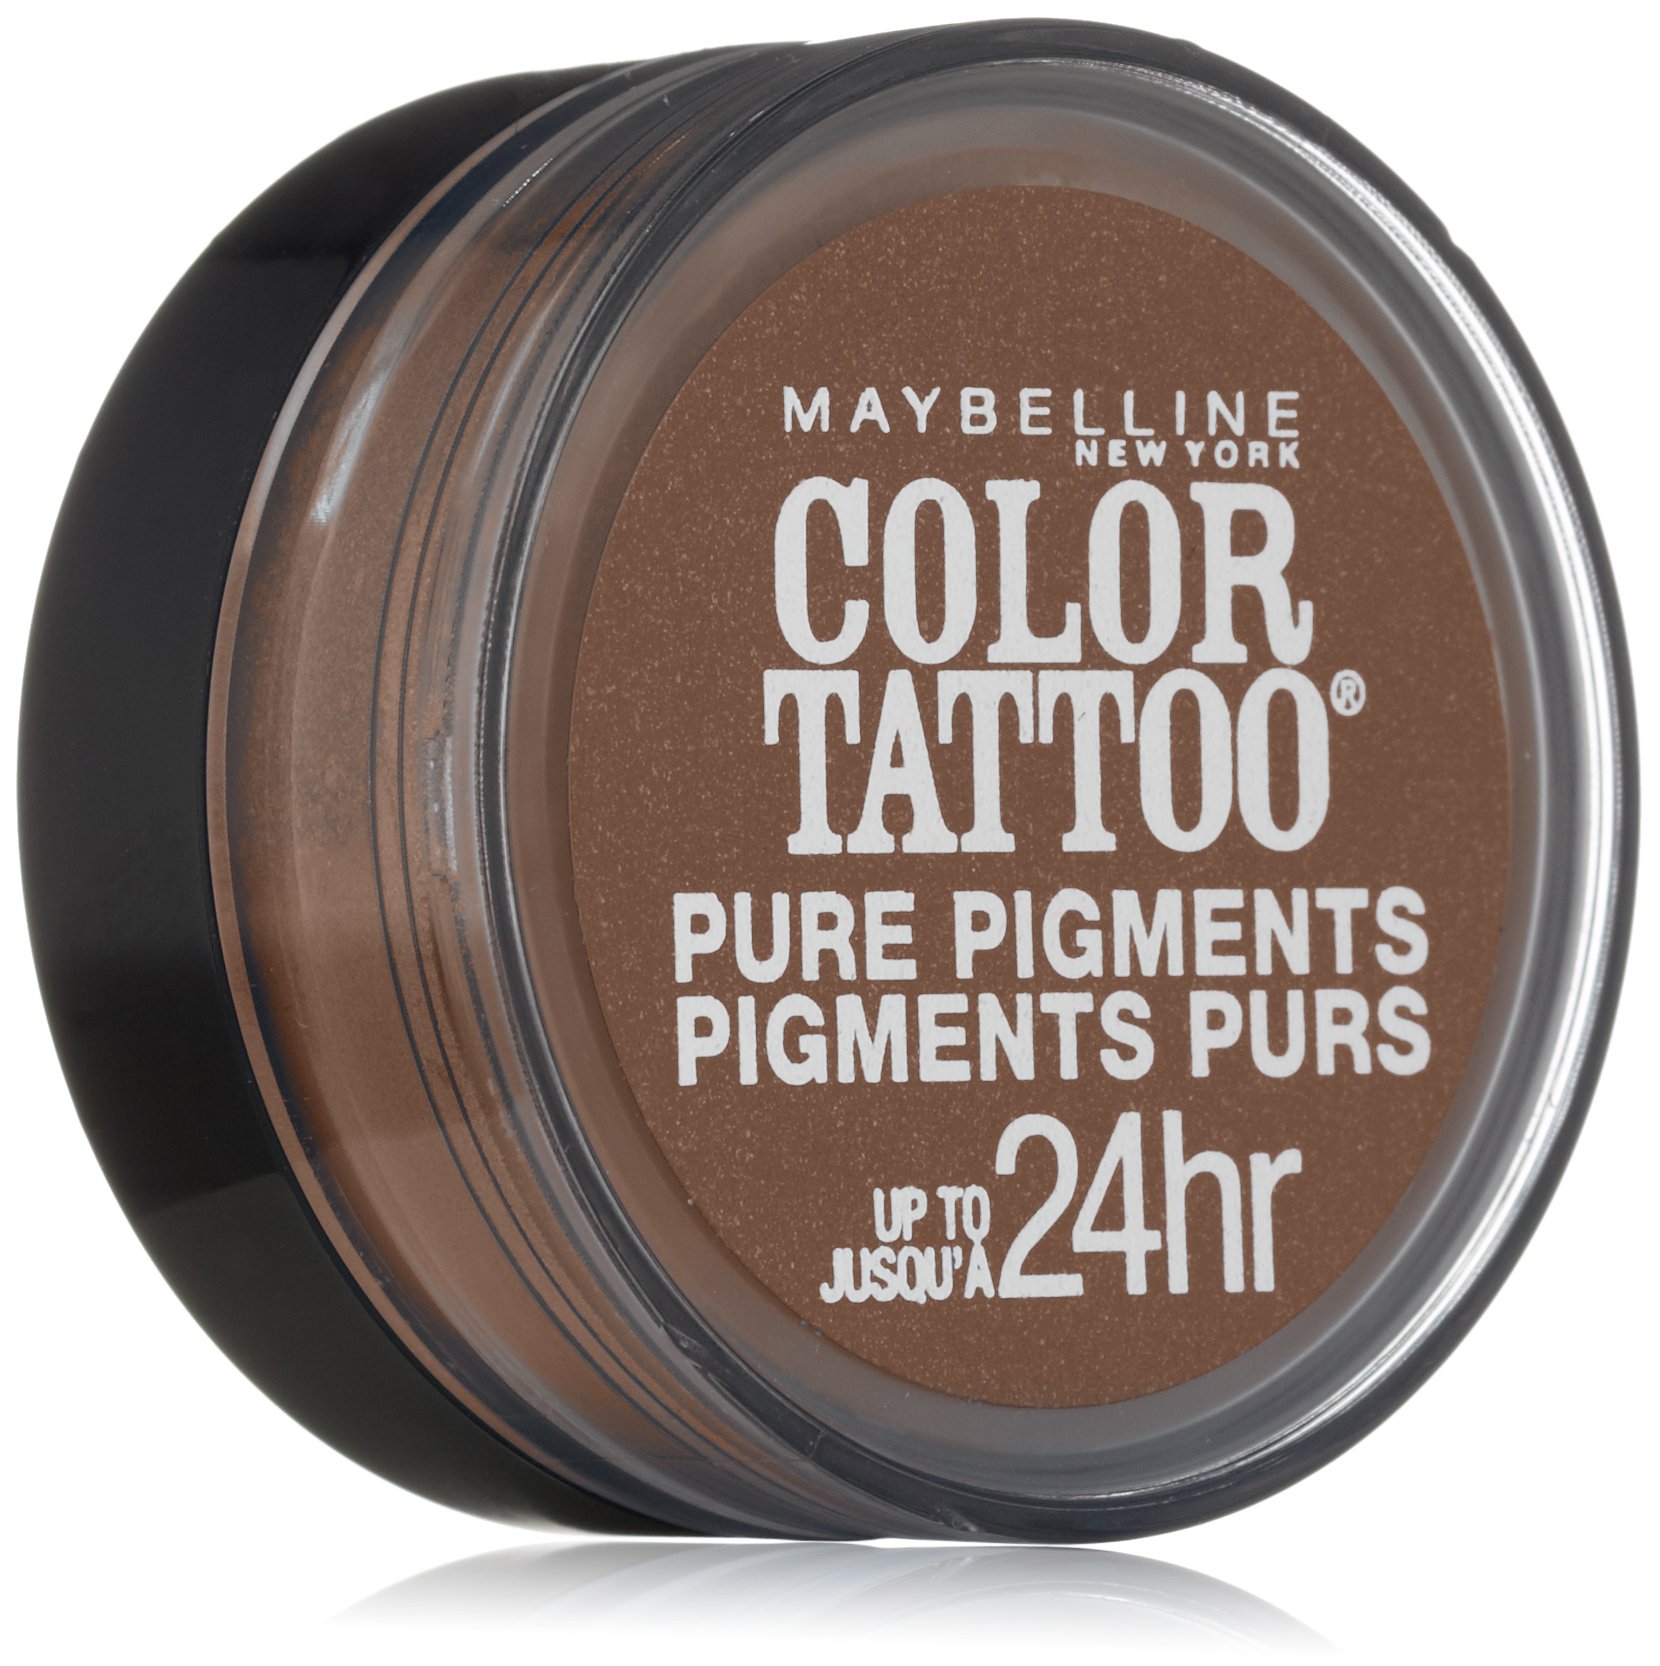 Maybelline New York Eye Studio Color Tattoo Pure Pigments, Downtown Brown, 0.05 Ounce